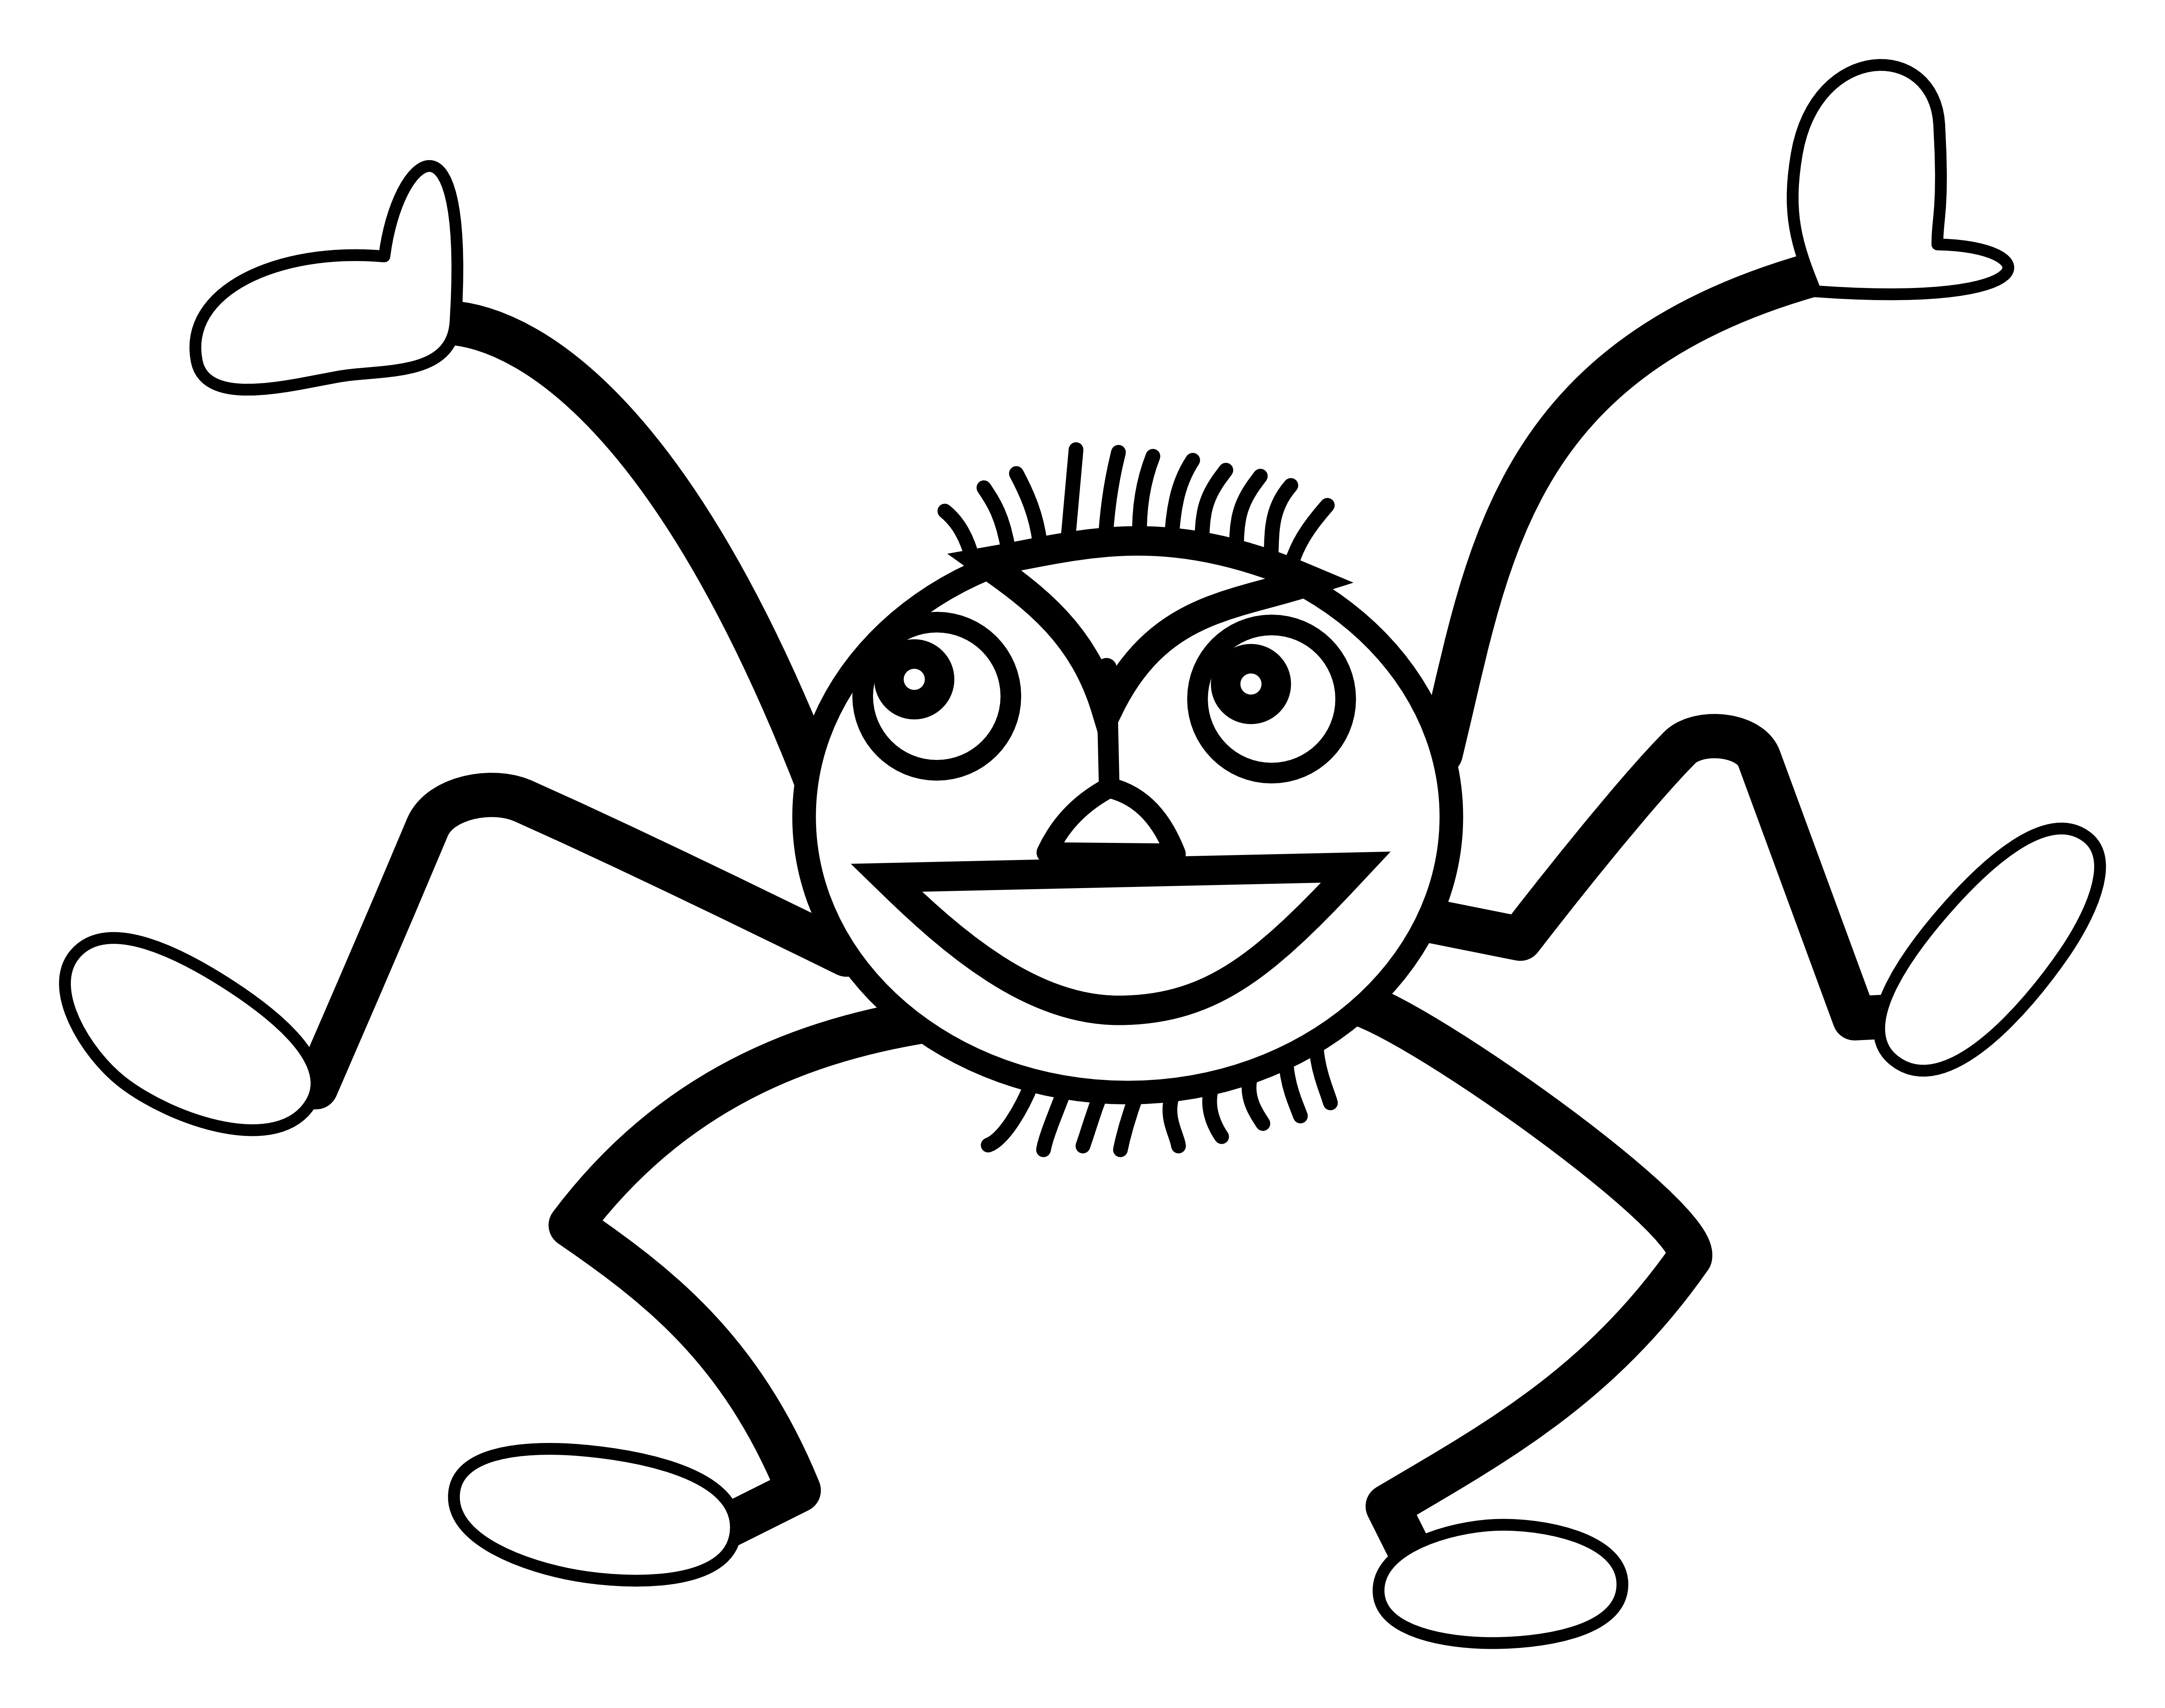 Firefly clipart black and white, Firefly black and white Transparent